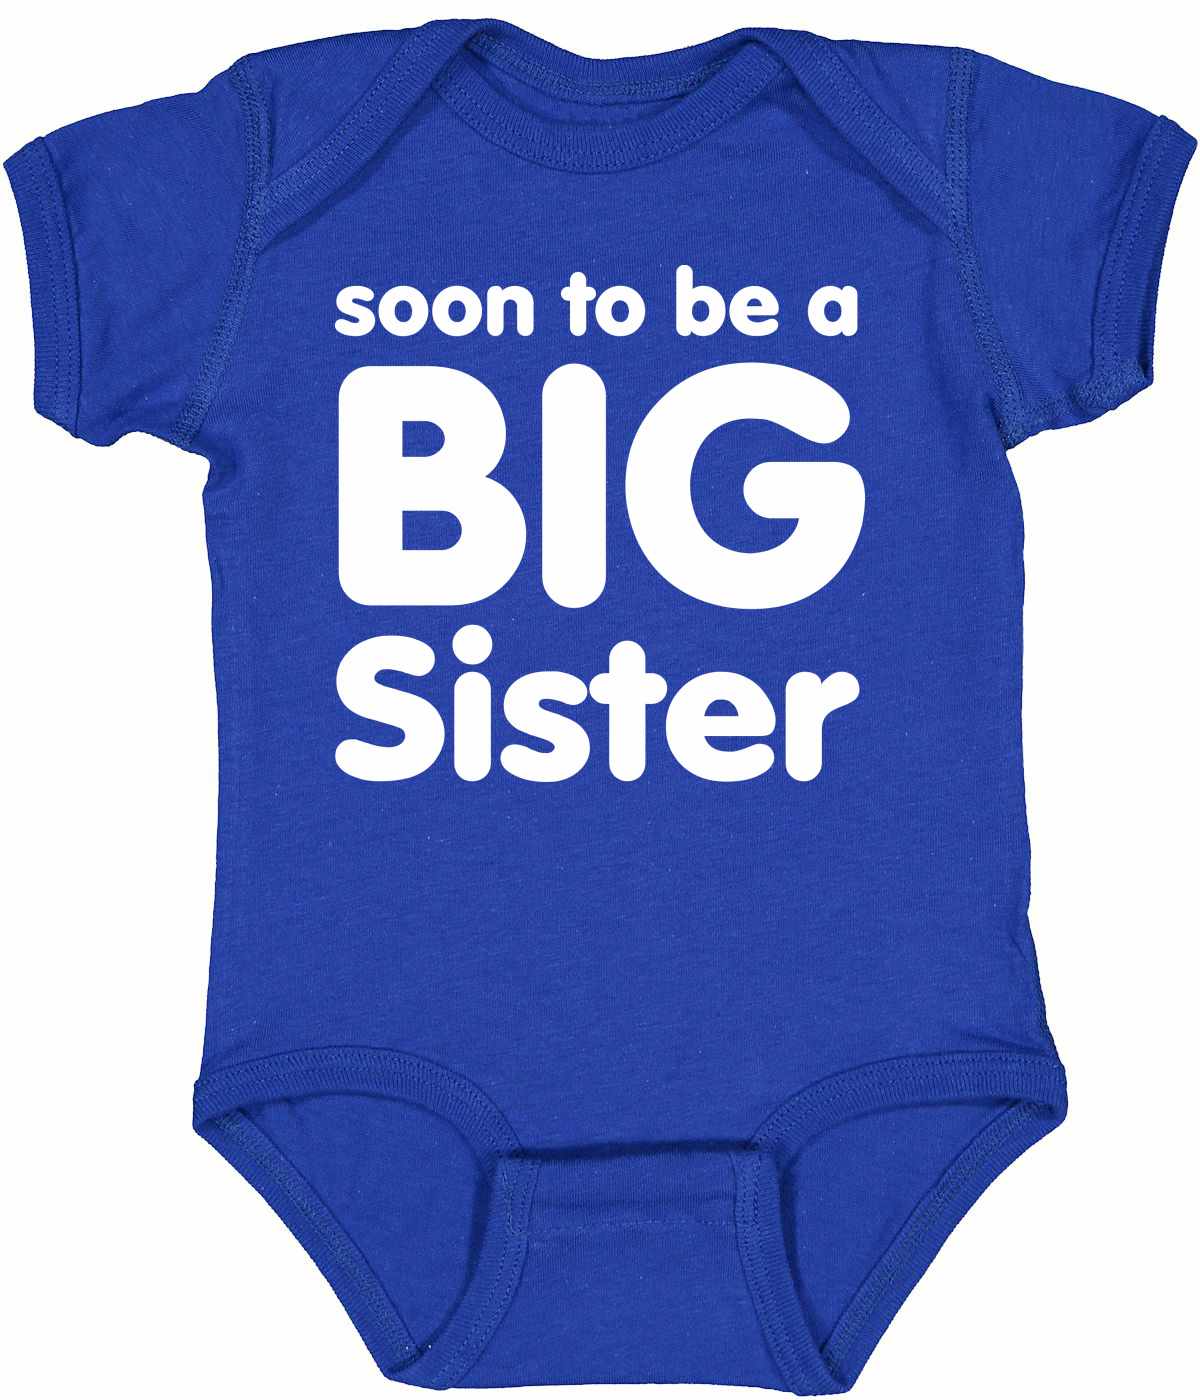 Soon to be a BIG SISTER on Infant BodySuit (#714-10)